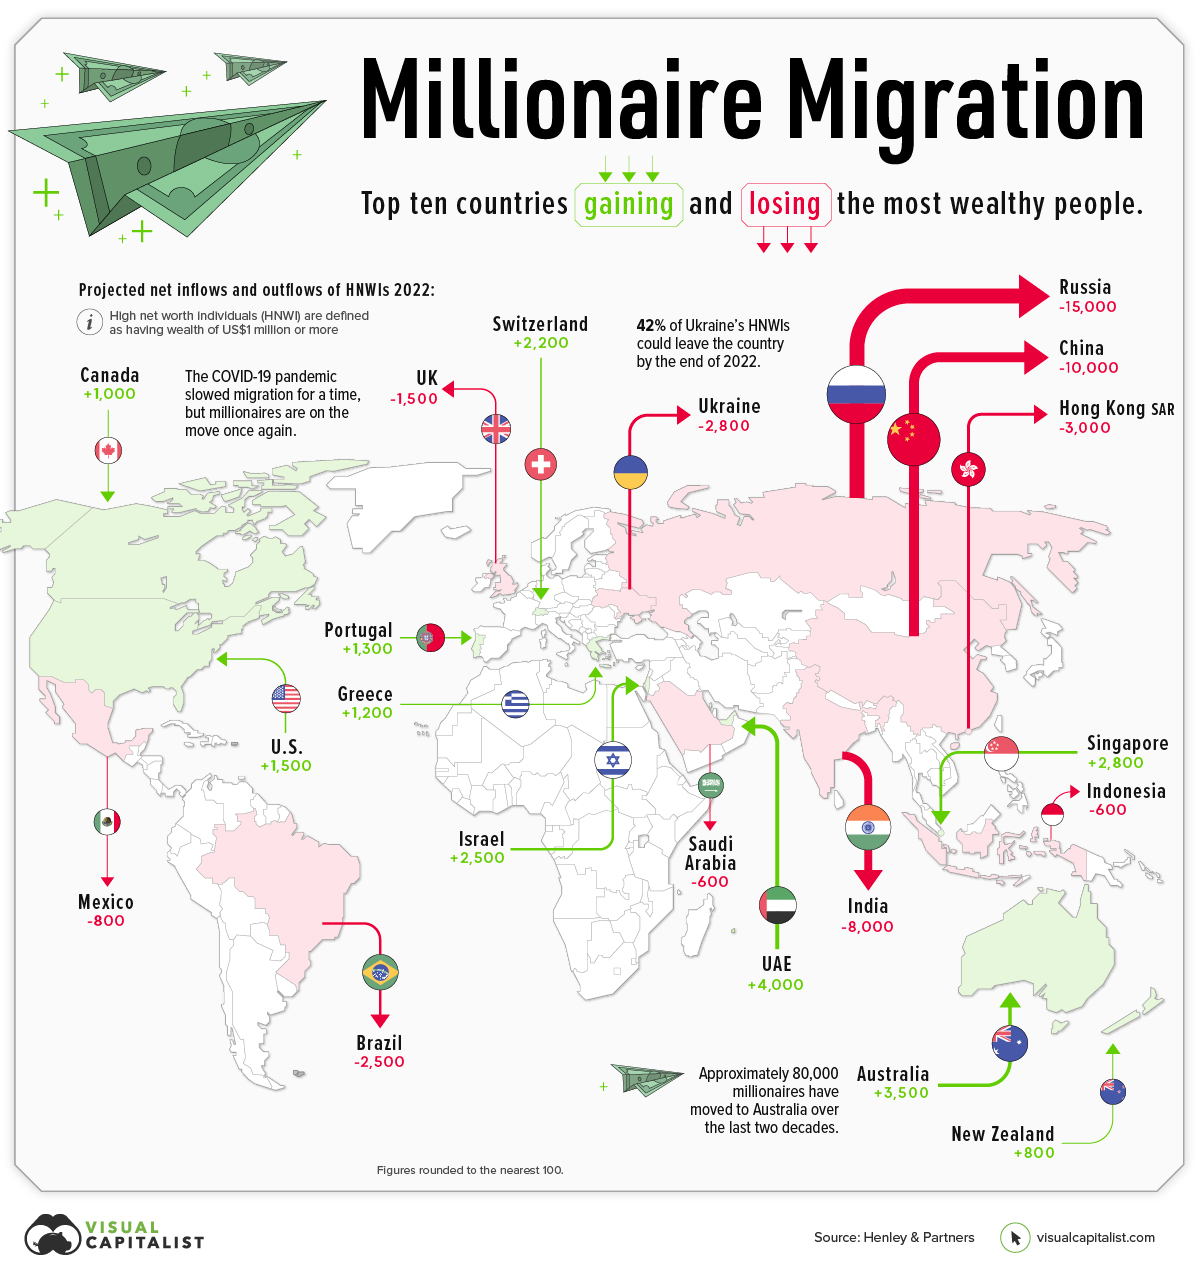 Millionaire migration from various countries to more free countries